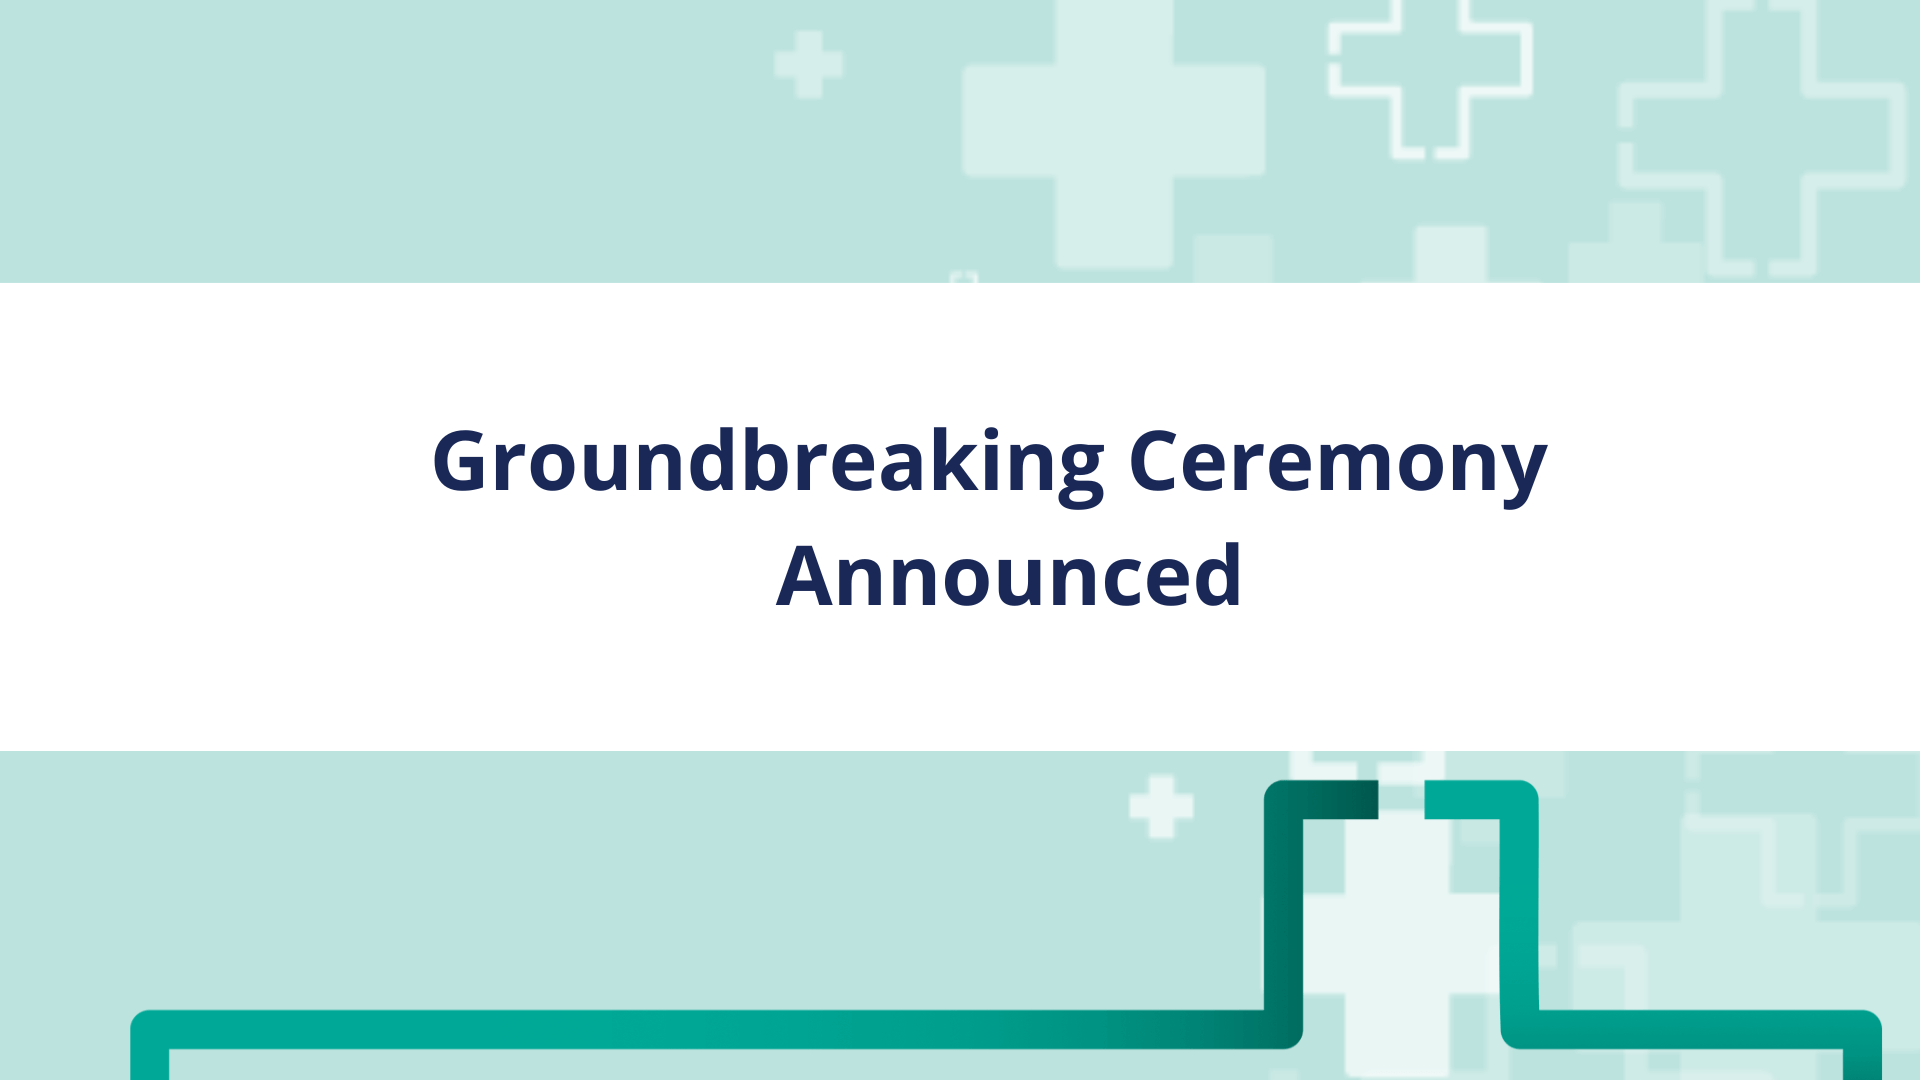 Groundbreaking Ceremony for $1.3M Expansion & Upgrade Announced